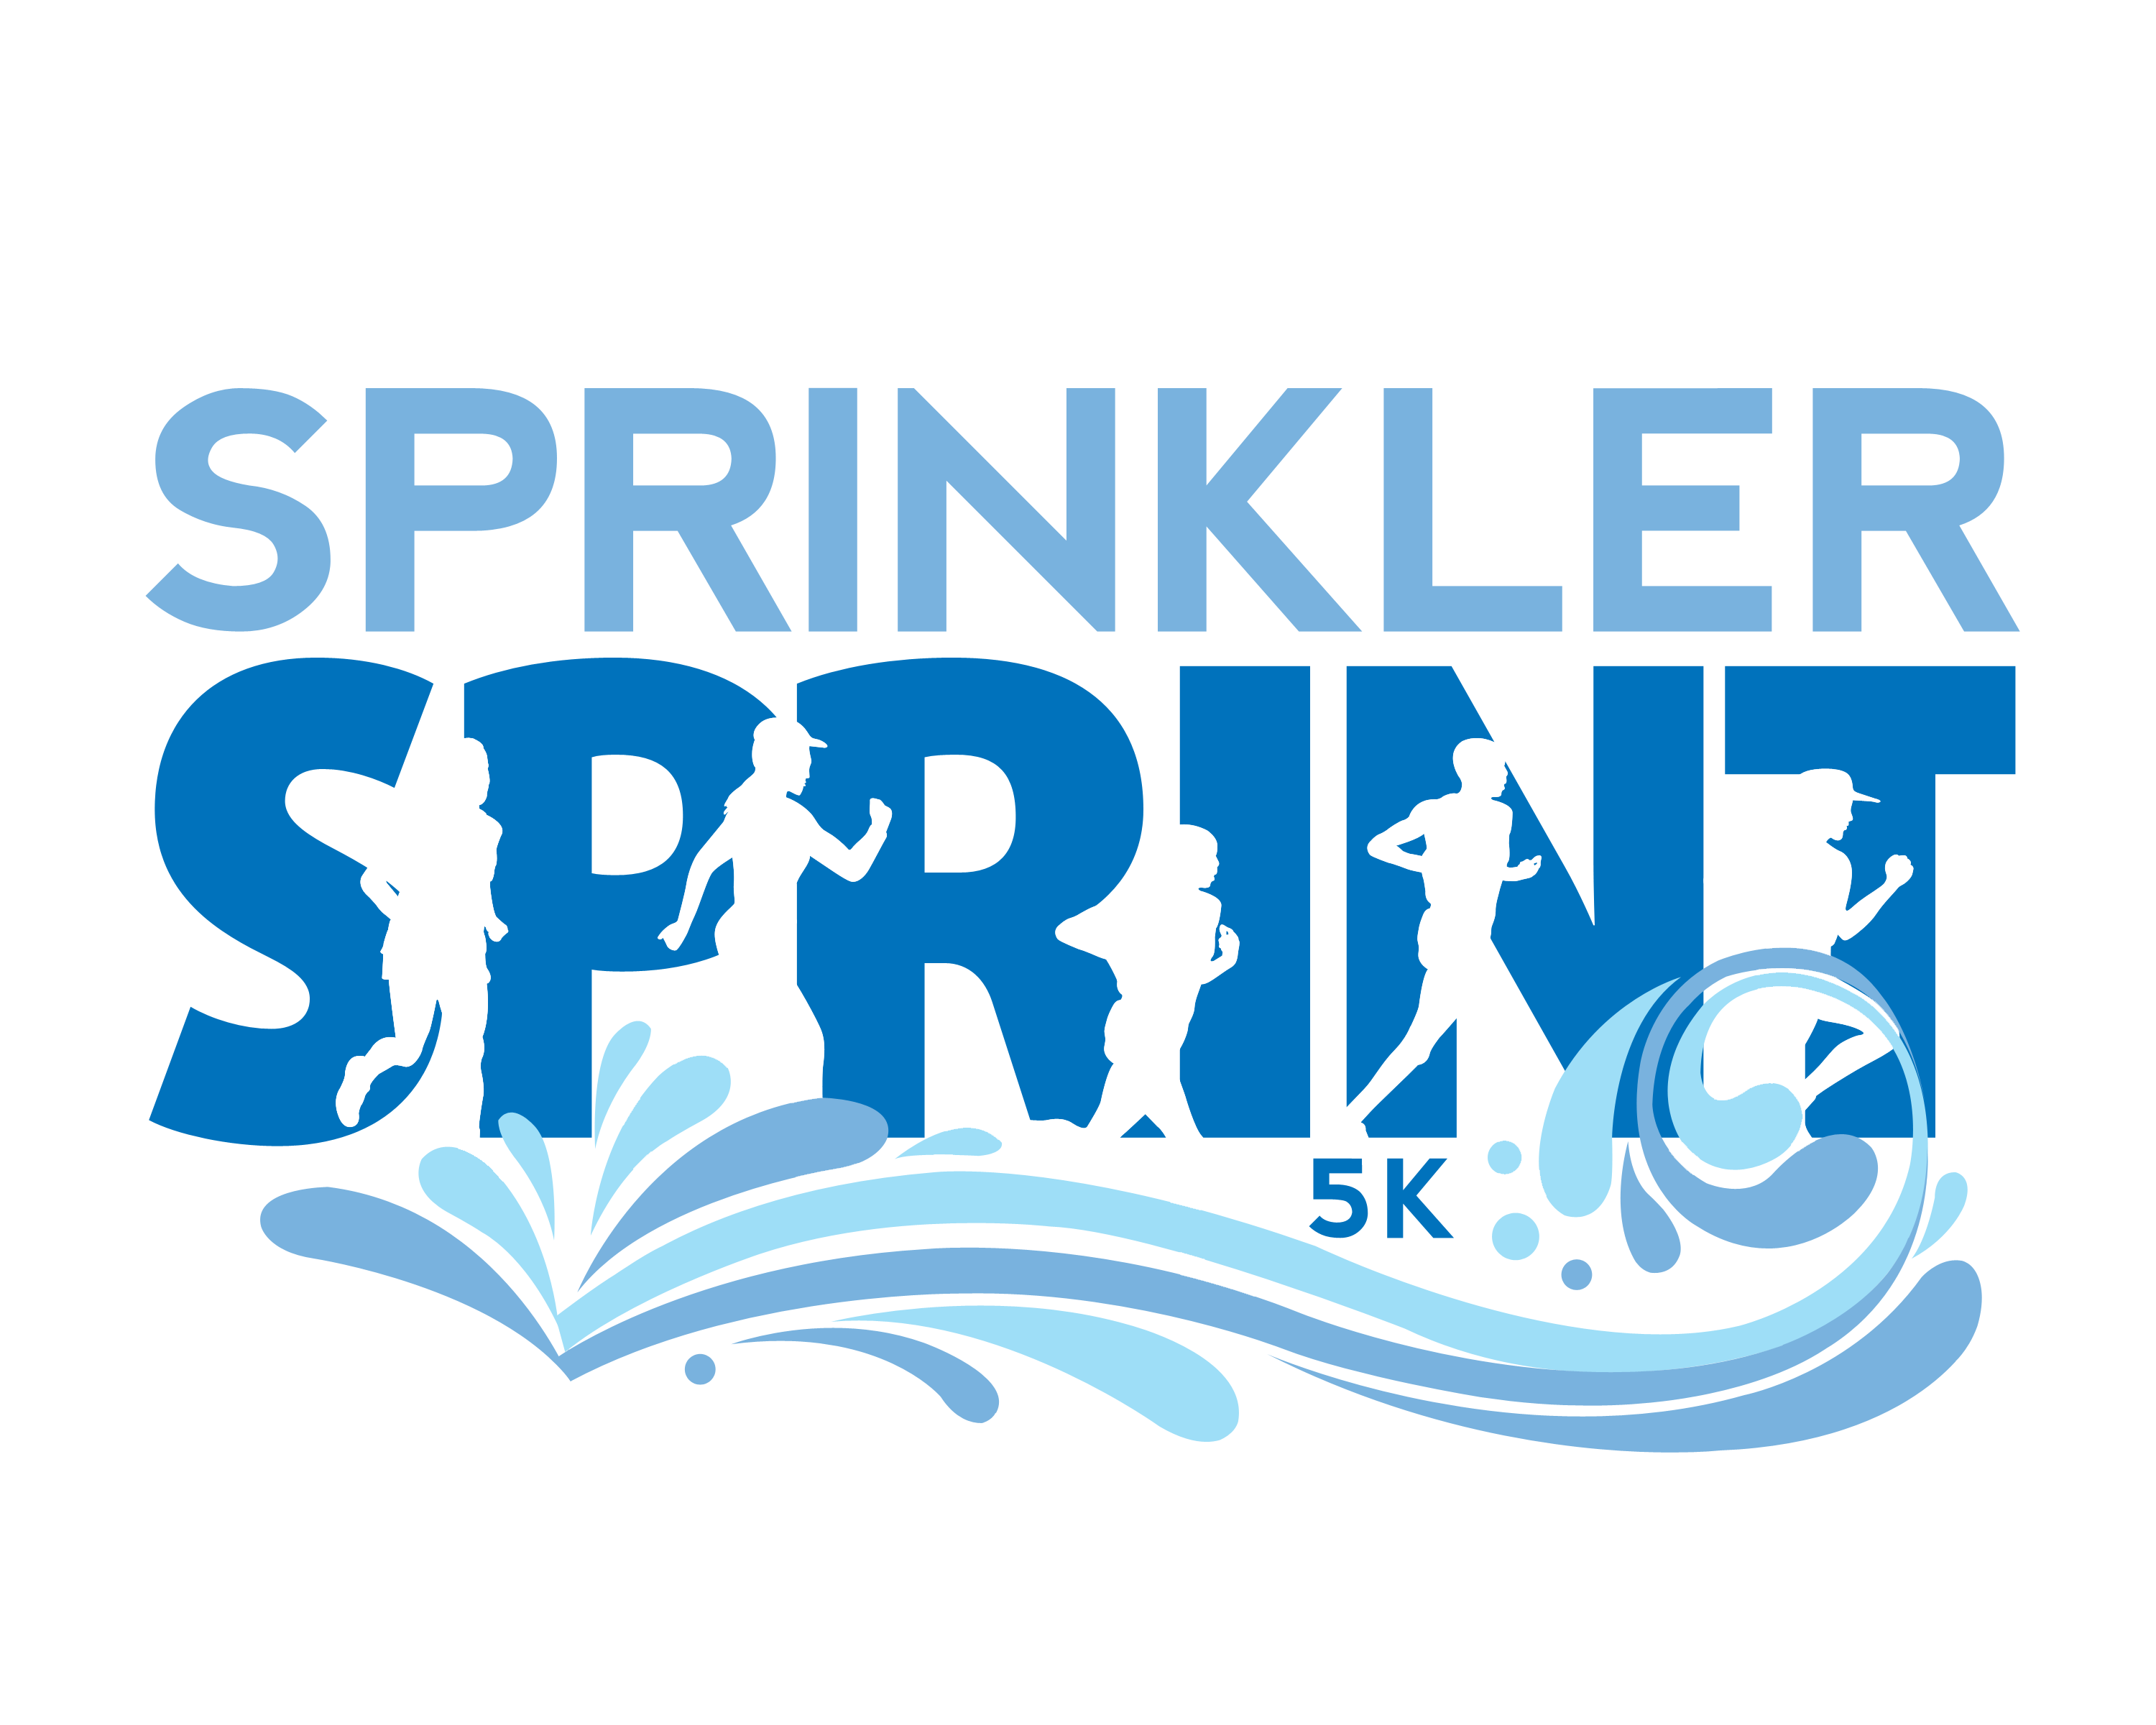 The Sprinkler Sprint 5k is a production of Downtown Runners Las Vegas whose goal is to have fun, get fit and build community.